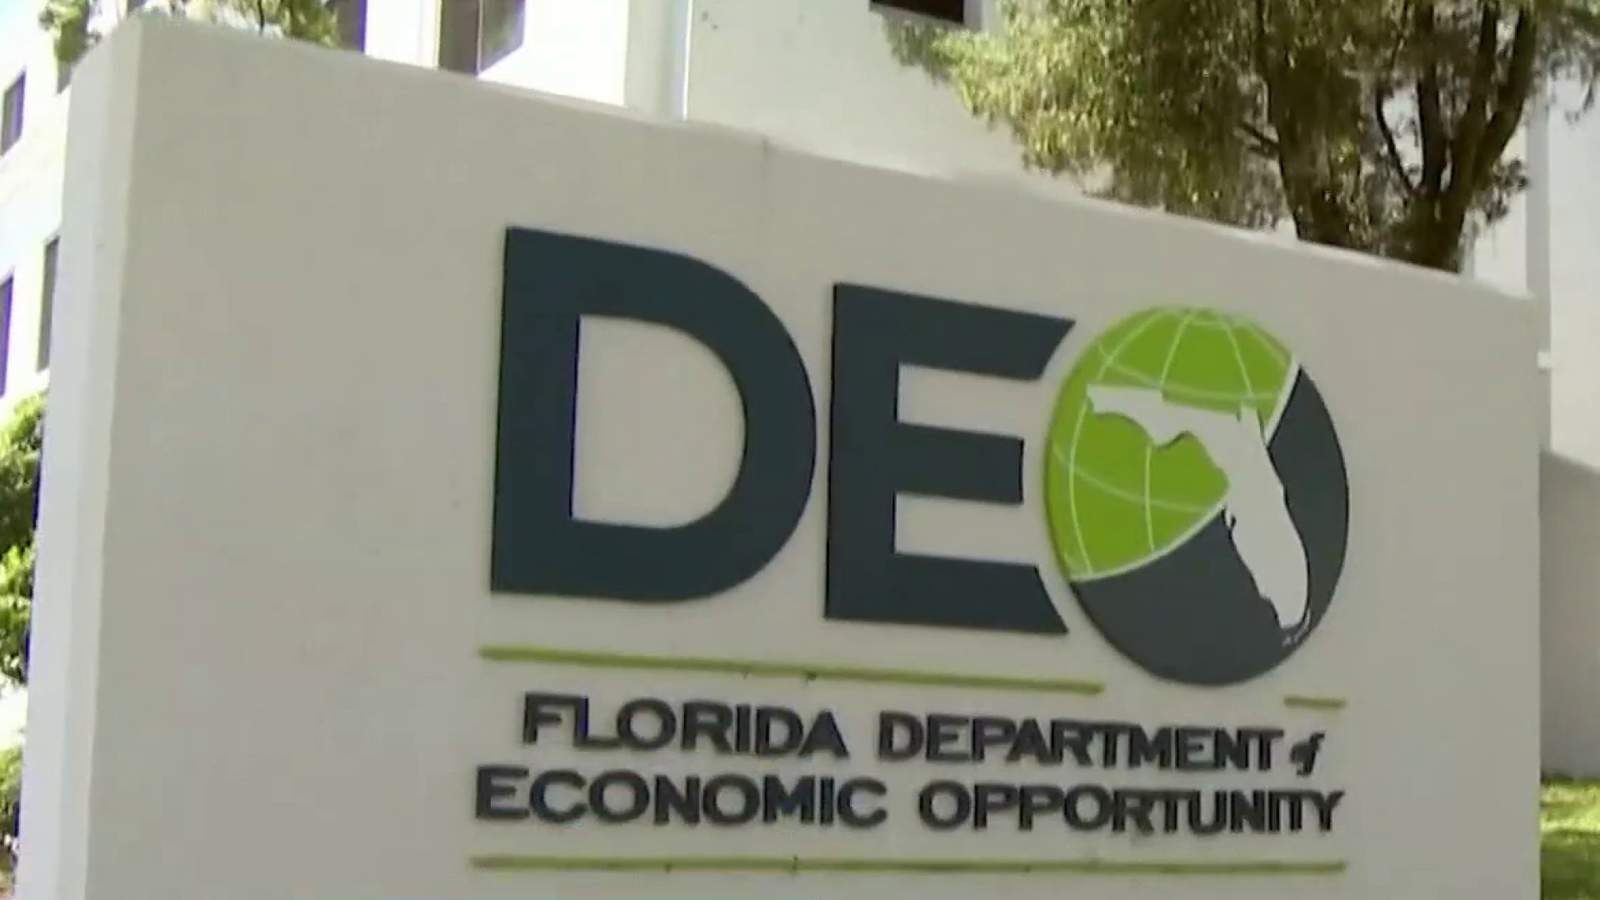 Florida unemployment call center workers hit roadblocks trying to help unemployed, lawmaker says